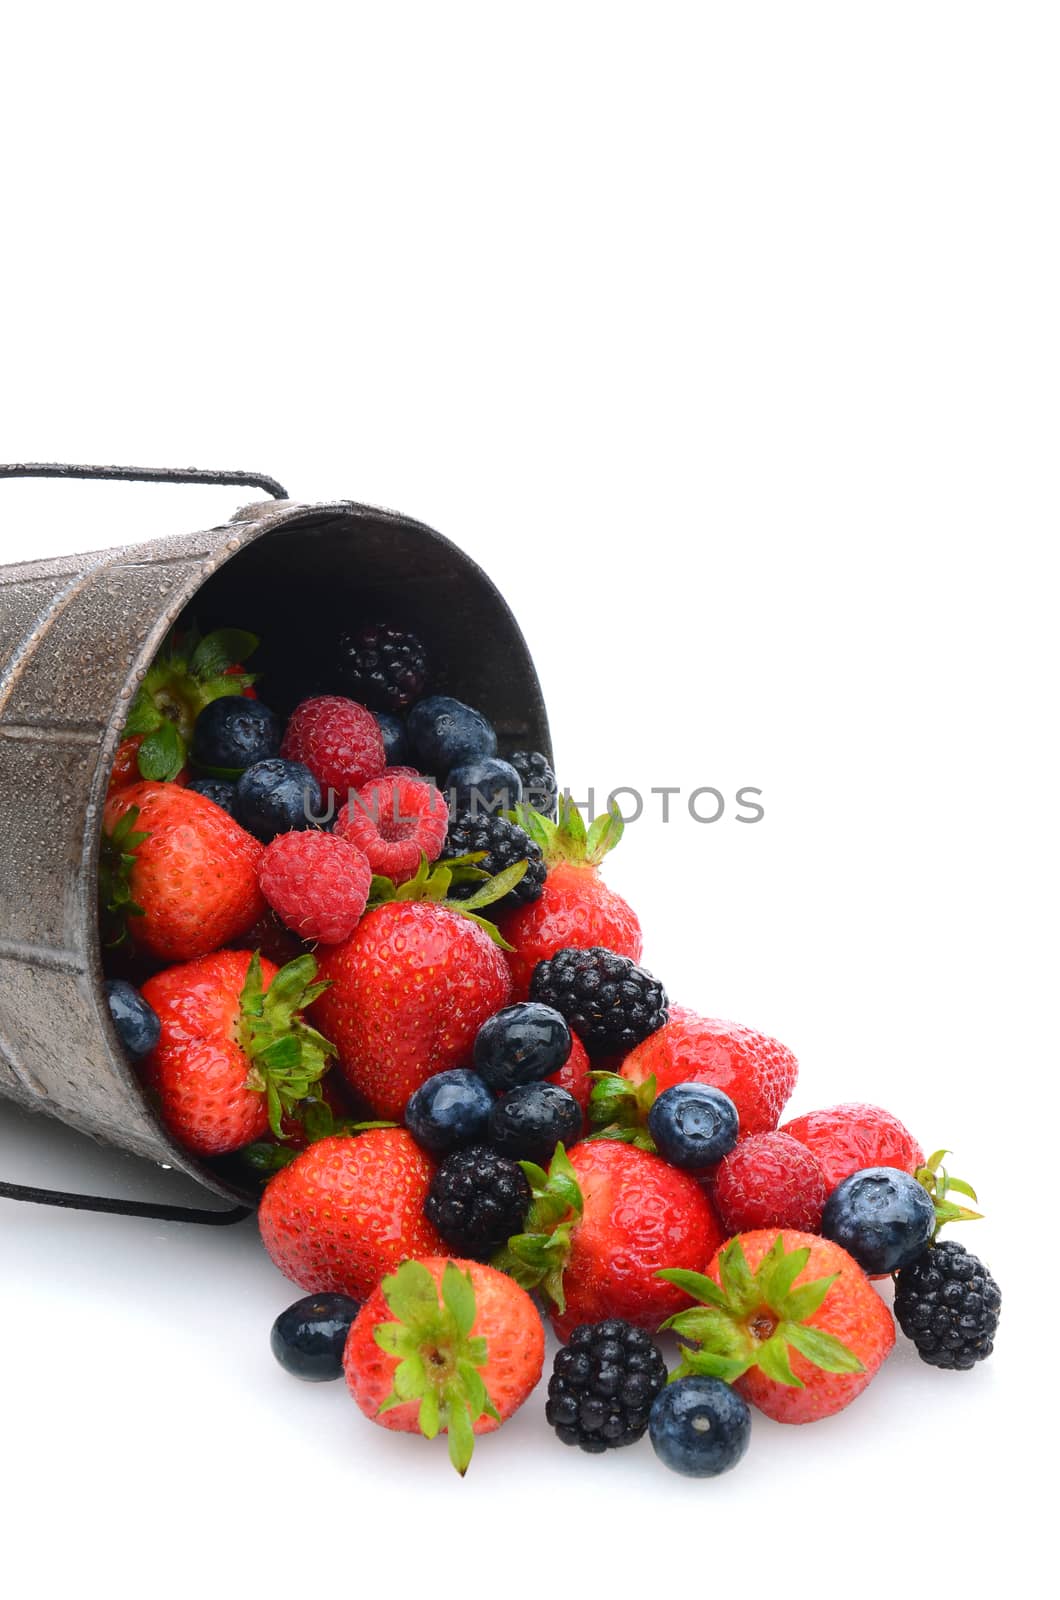 A pail laying on its side with assorted berries spilling out. Vertical format with copy space.